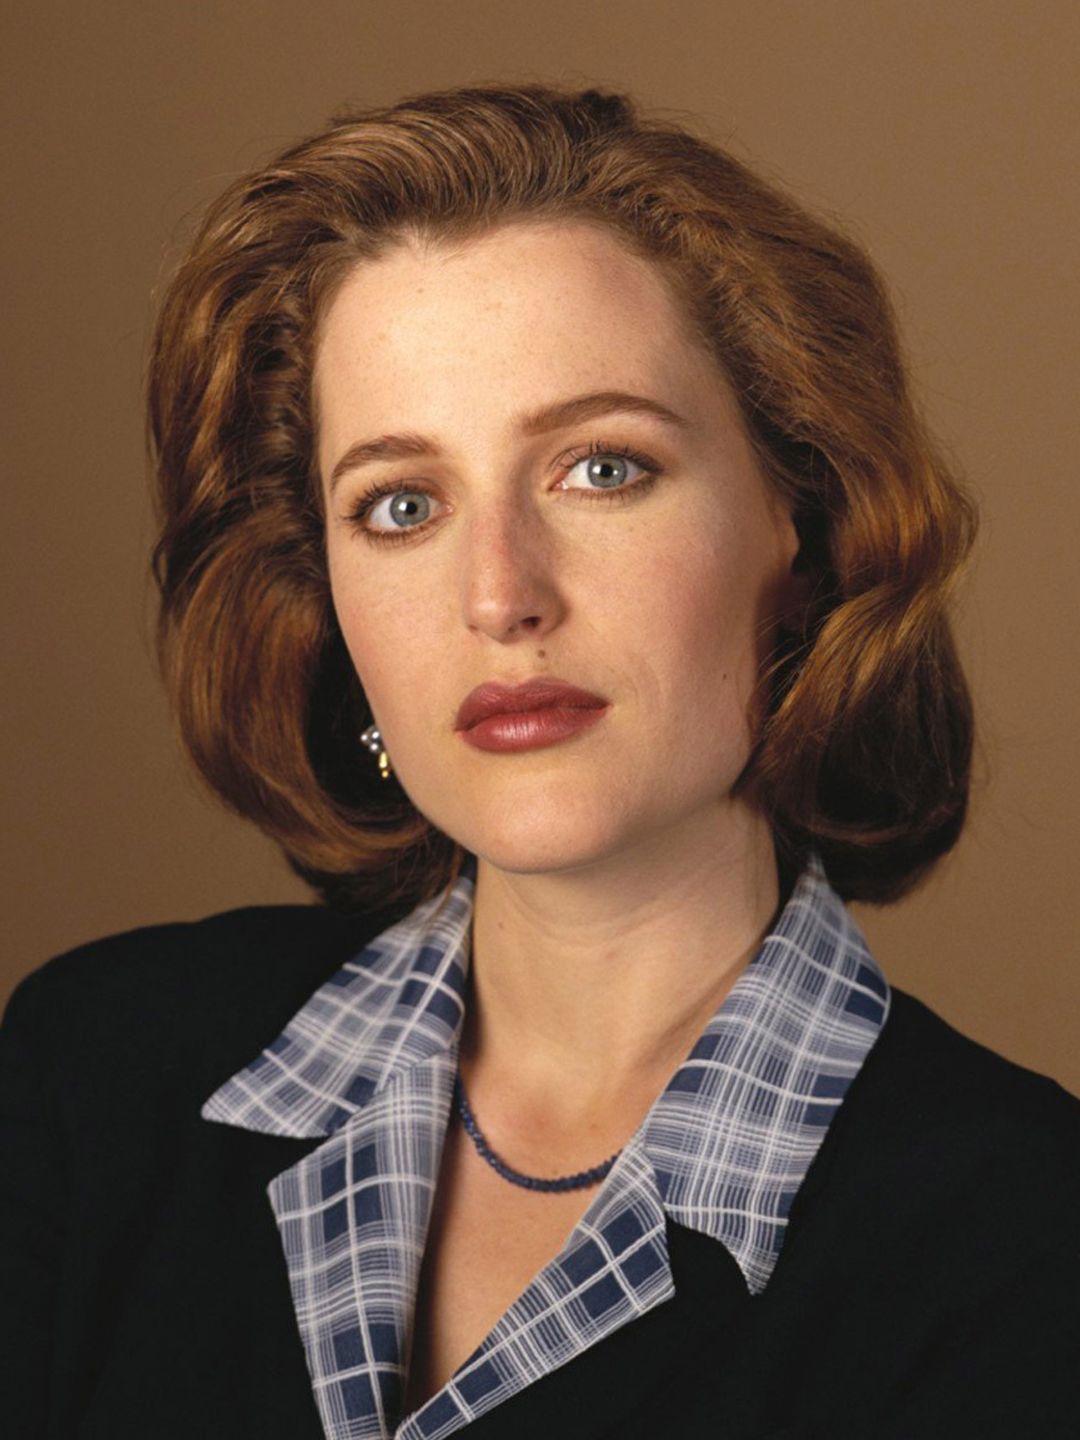 Gillian Anderson who is her mother